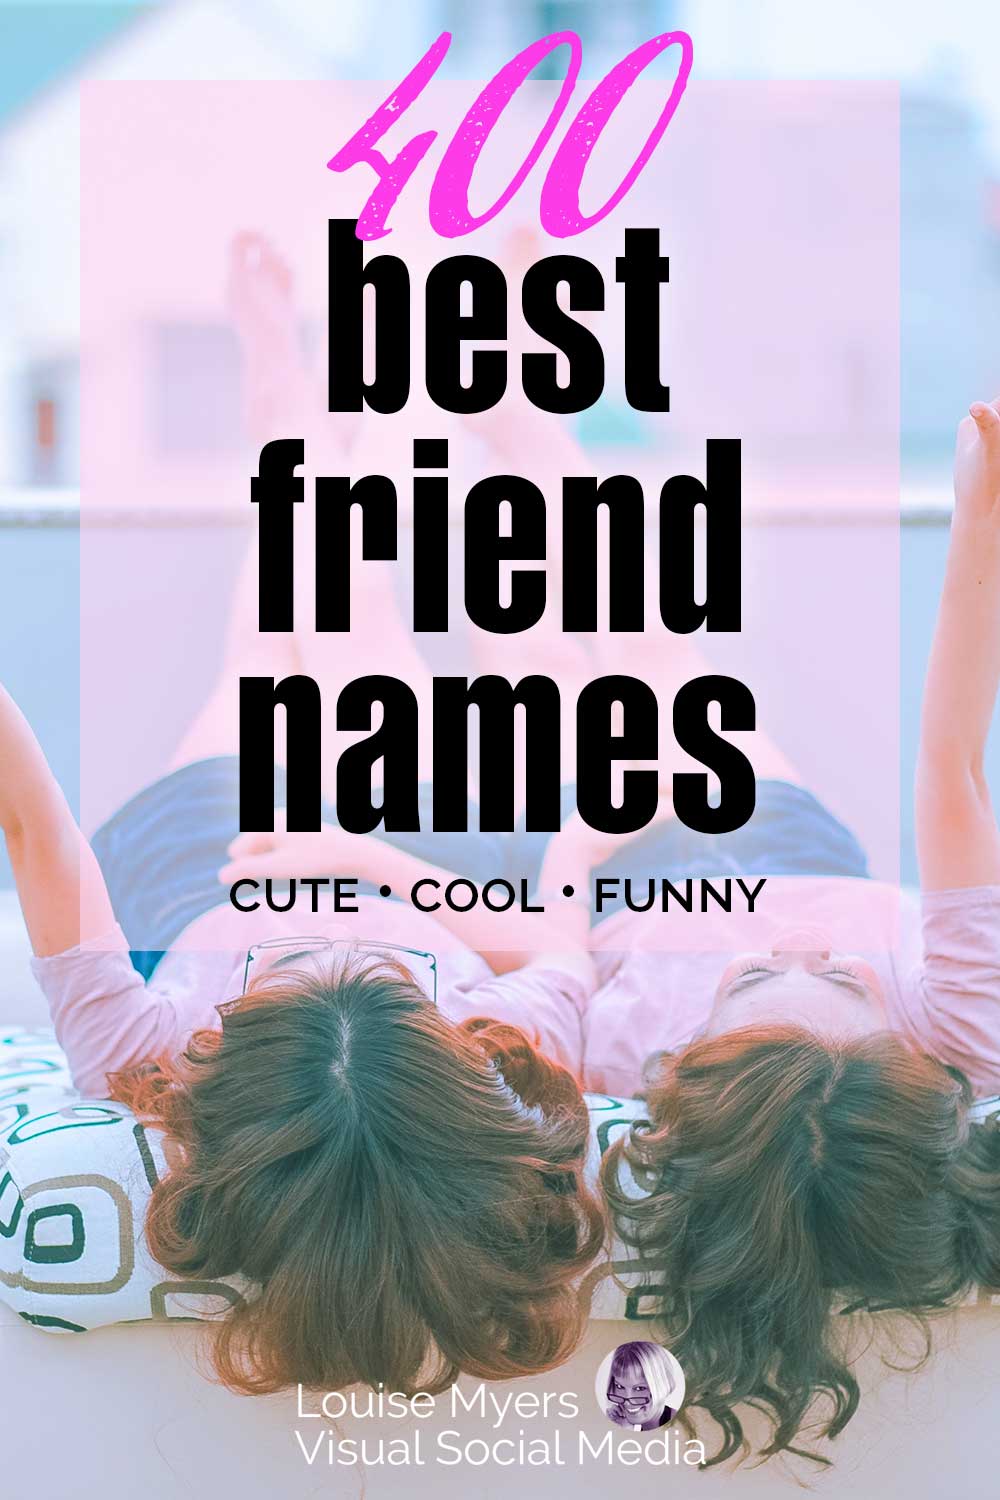 two teens lying on bed with feet up says 400 best friend names.